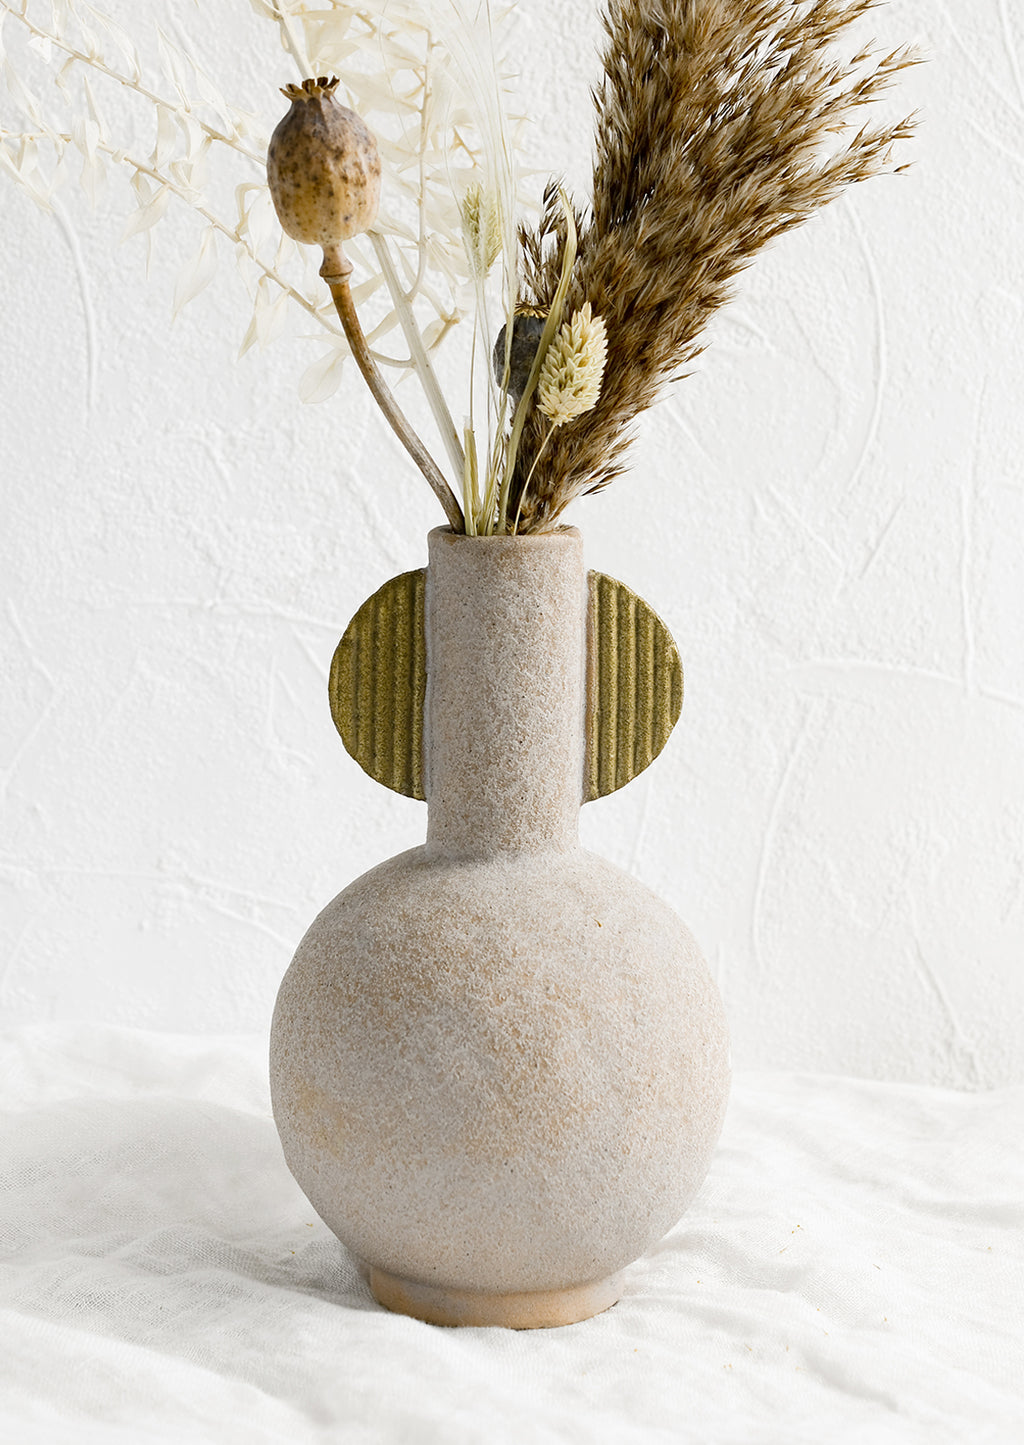 2: A sculptural ceramic vase with dried flowers.